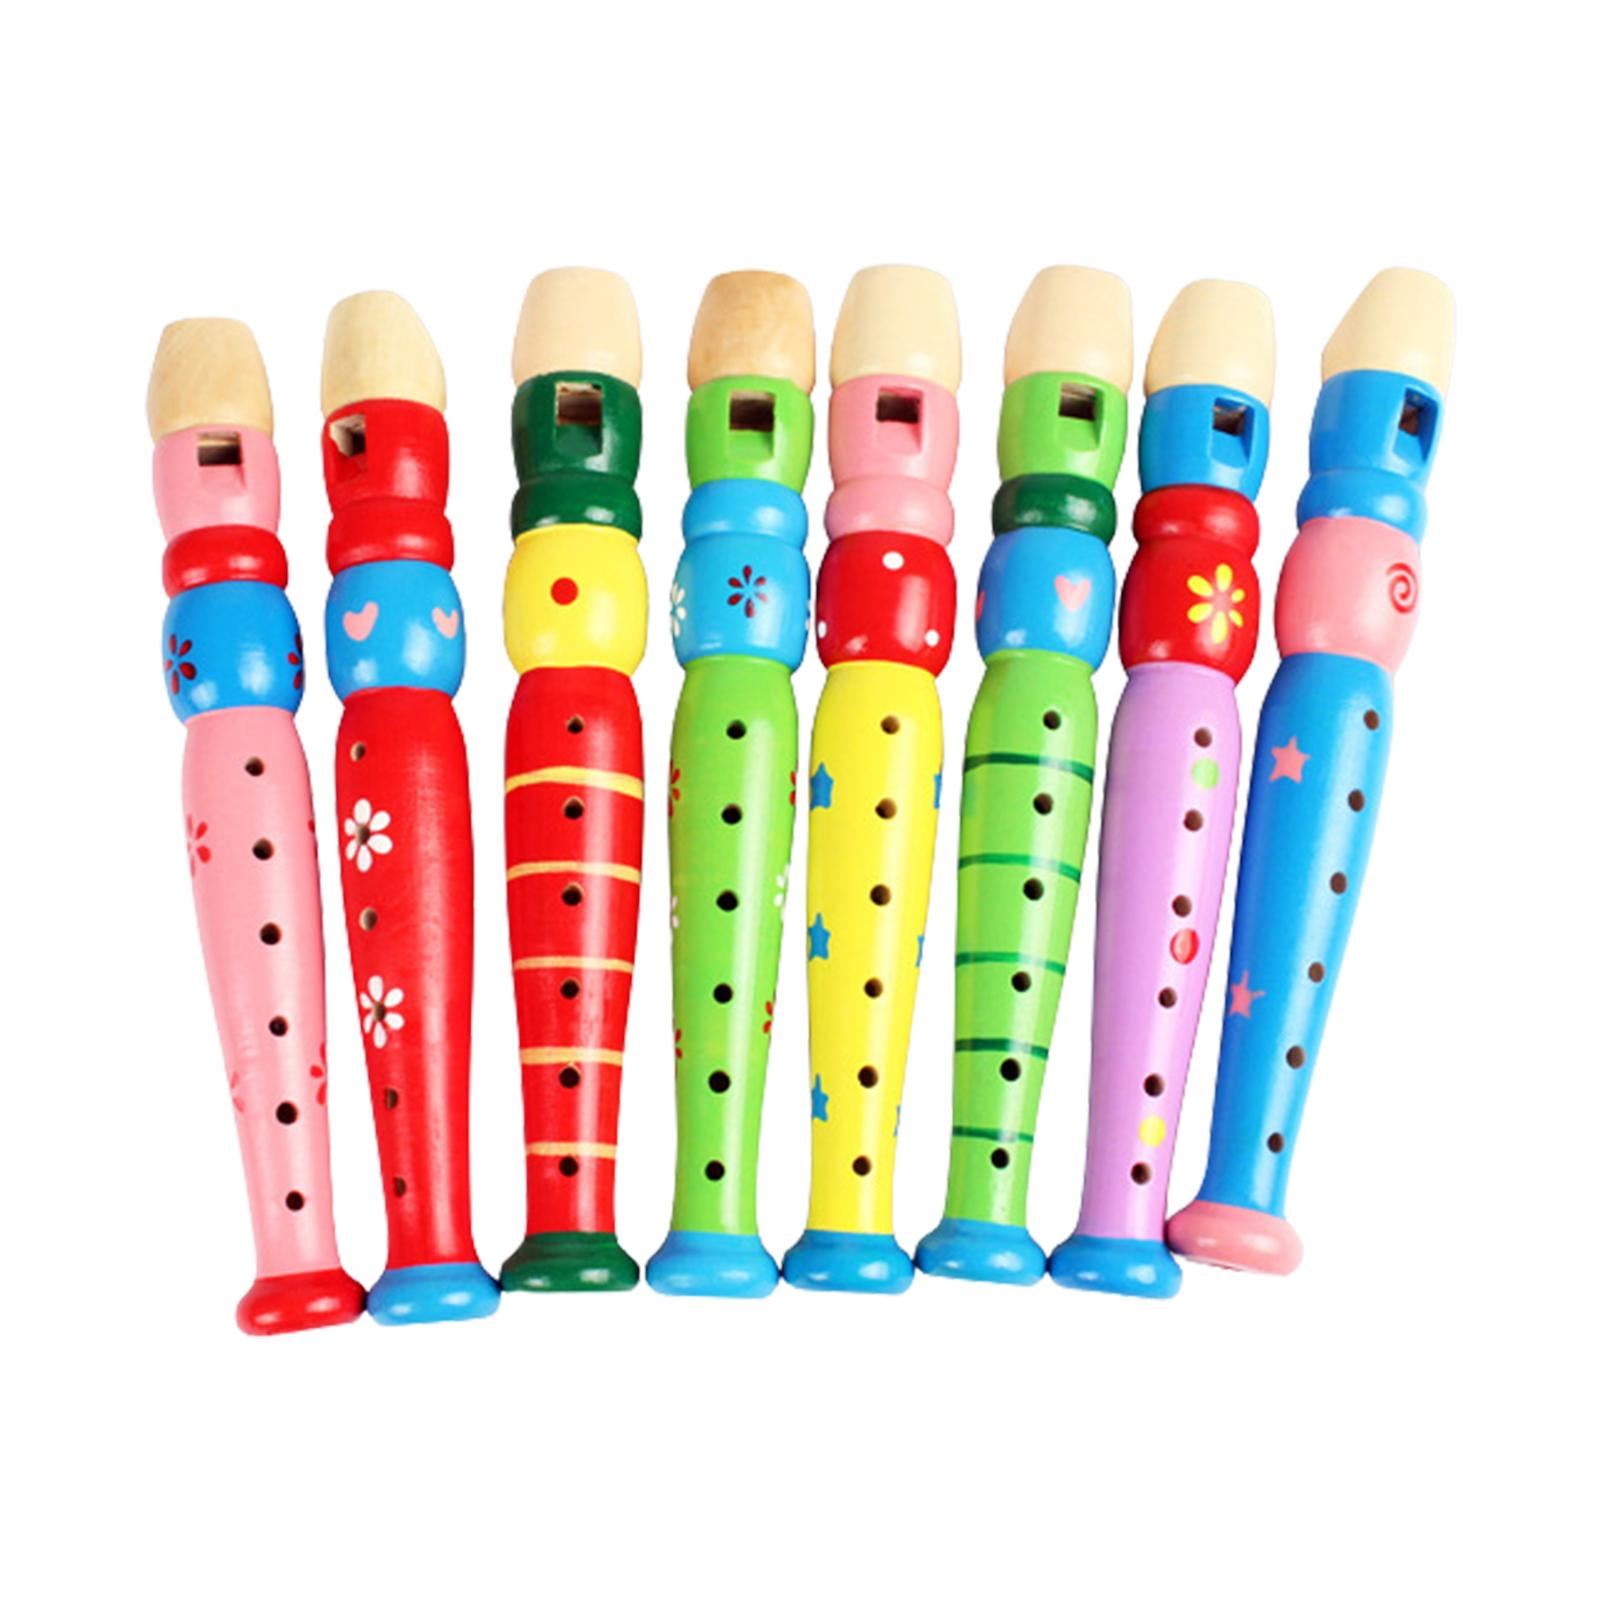 Wooden Flutes Musical Instrument Small and Portable Early Educational Short Flute Mini Instruments for Children Toddlers Shakven 